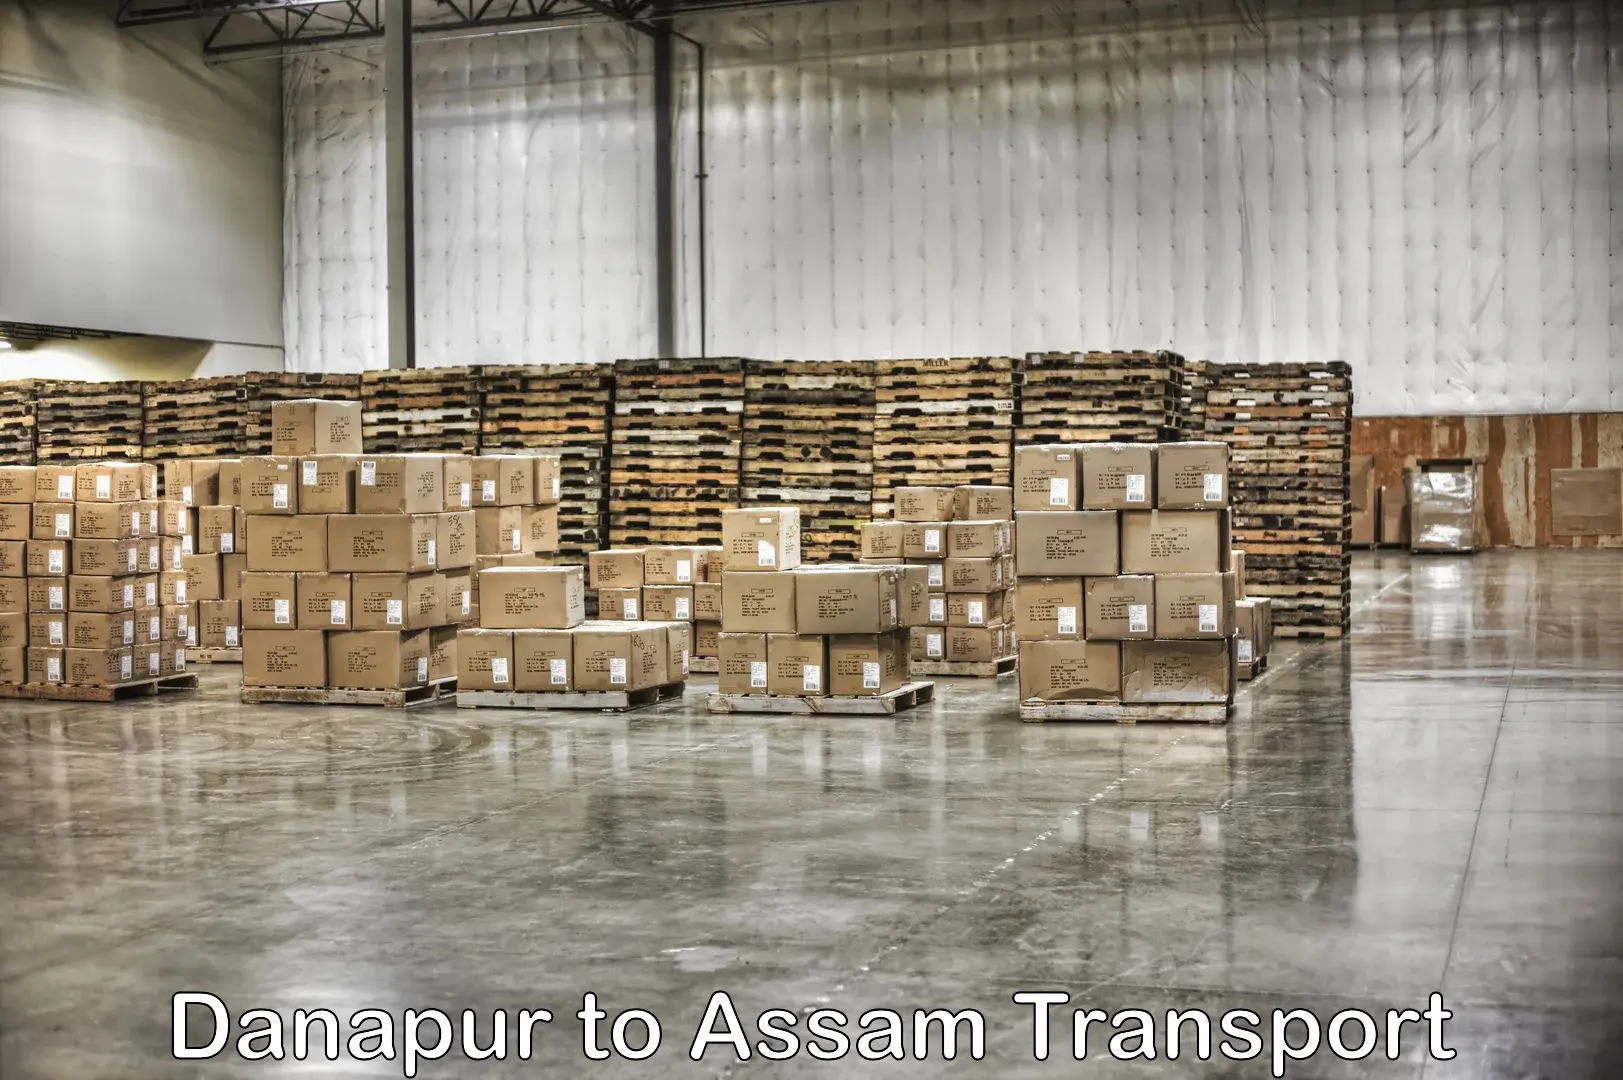 Delivery service Danapur to Lala Assam